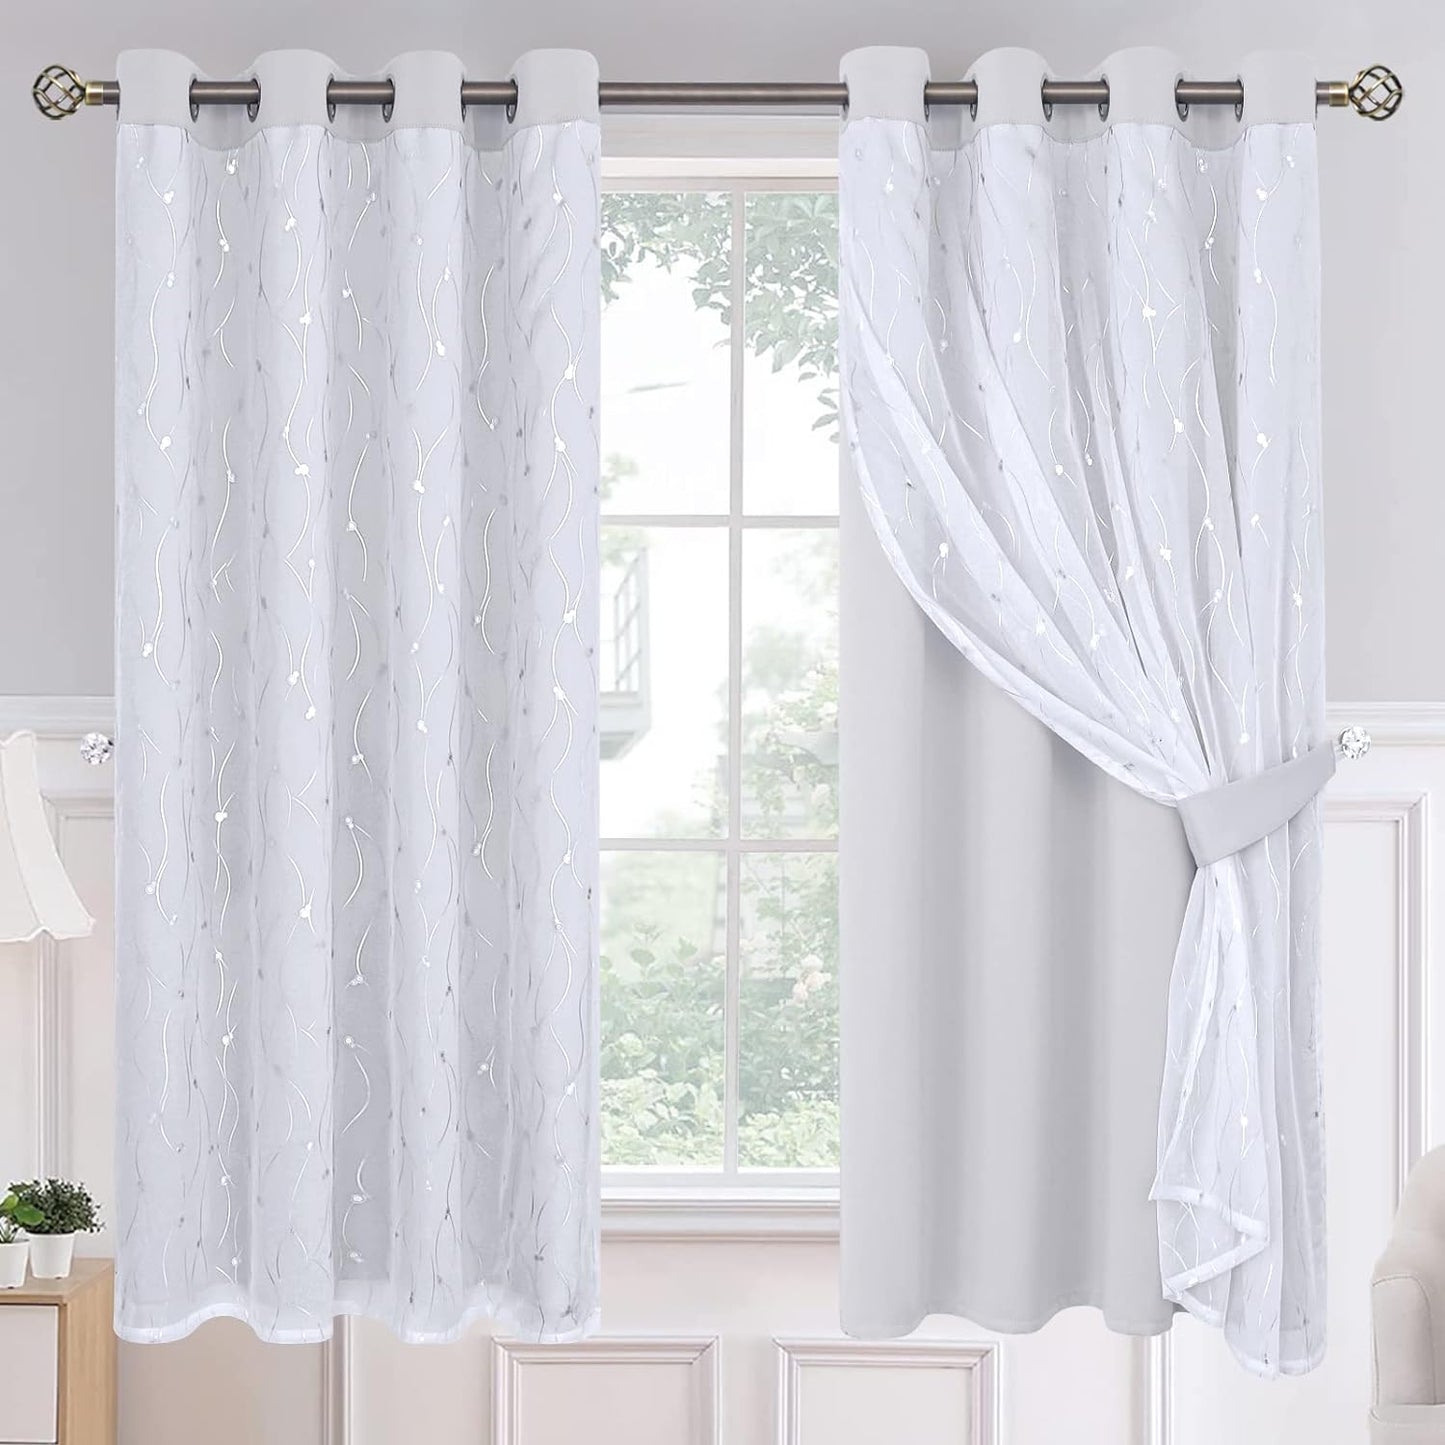 Bgment Grey Blackout Curtains with Sheer Overlay 84 Inches Long，Double Layer Silver Printed Kids Curtains Grommet Thermal Insulated Window Drapes for Living Room, 2 Panel, 52 X 84, Dark Grey  BGment Greyish White 52W X 63L 